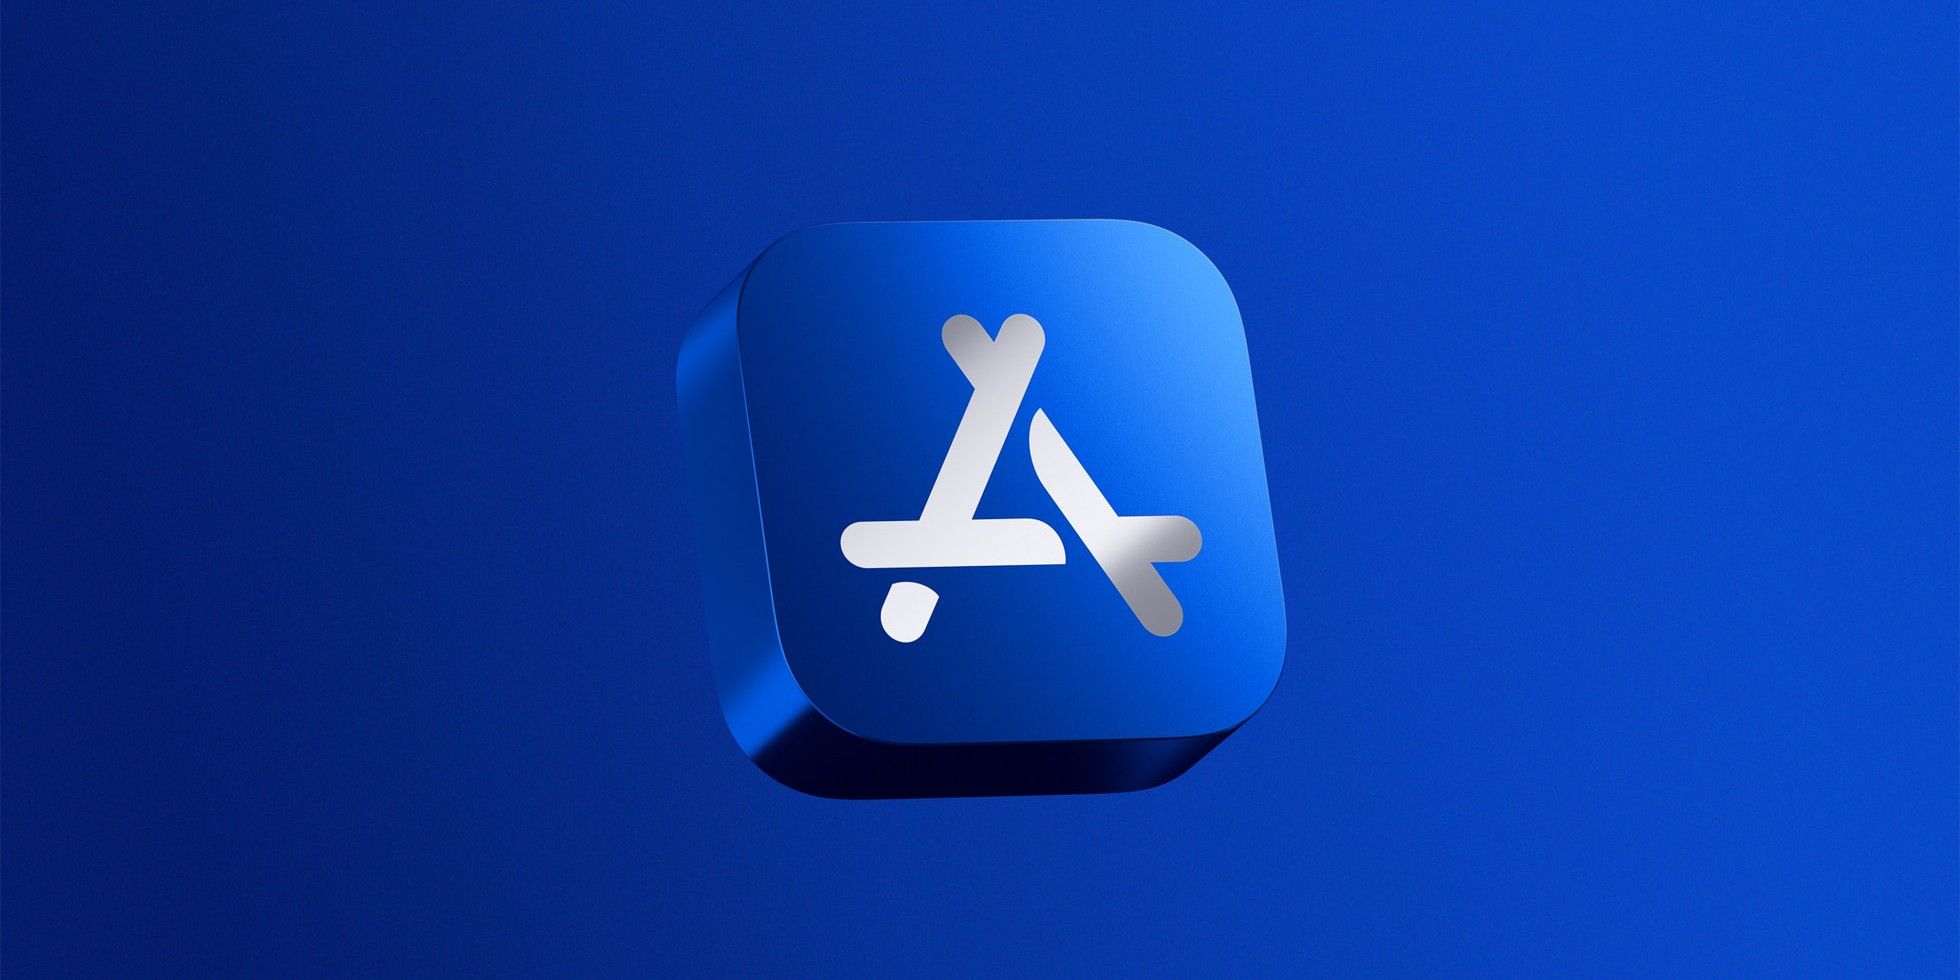 An Apple App Store logo on a blue background